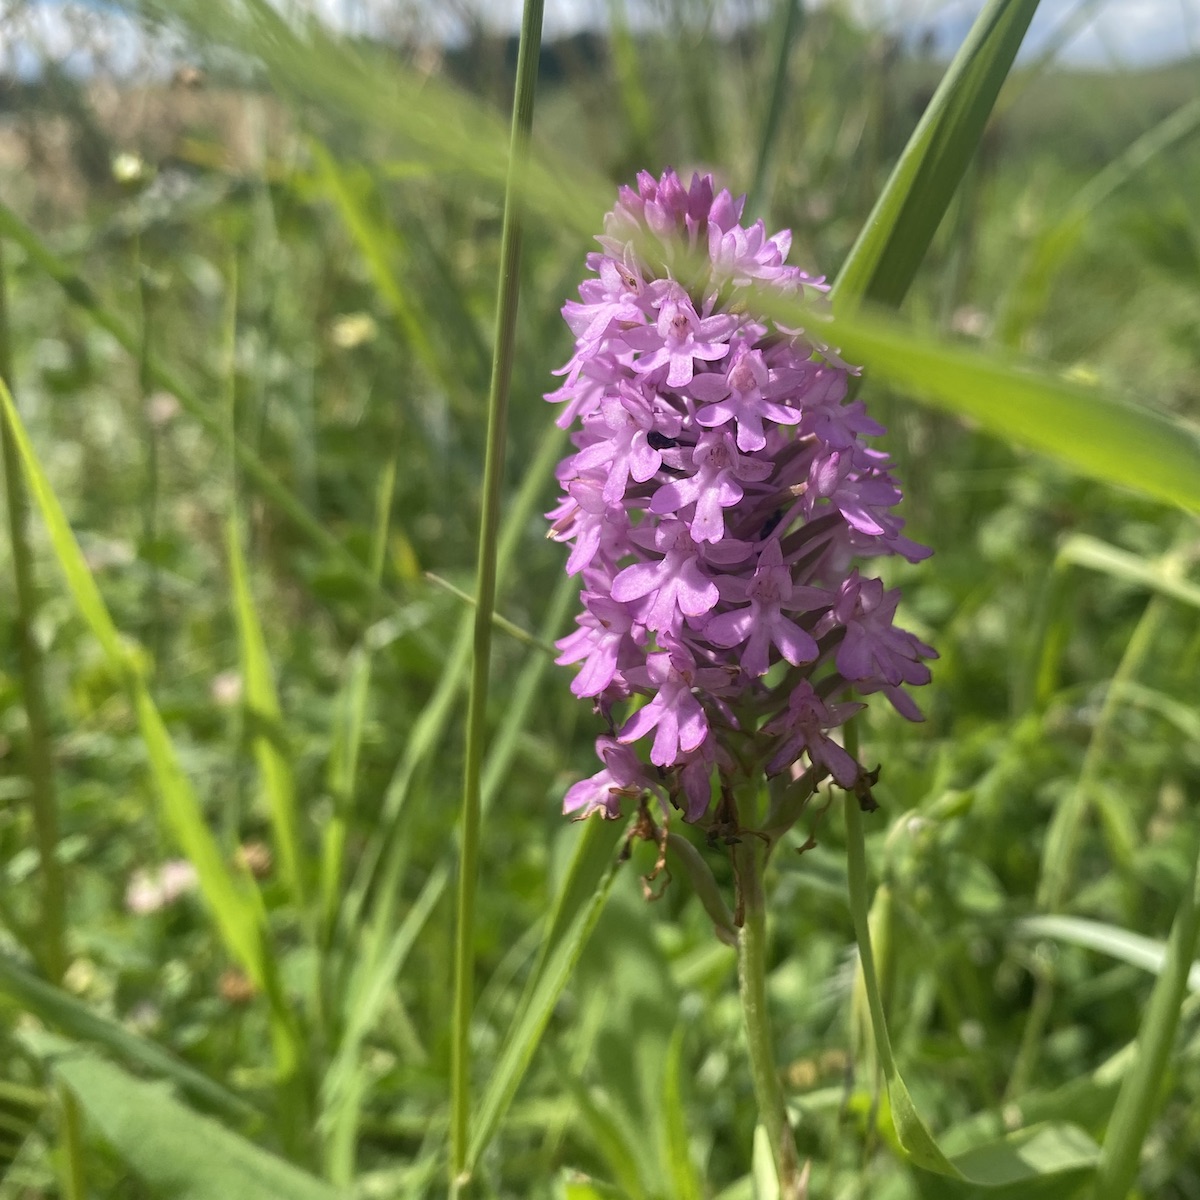 Pyramidal orchid flowers among grass leaves